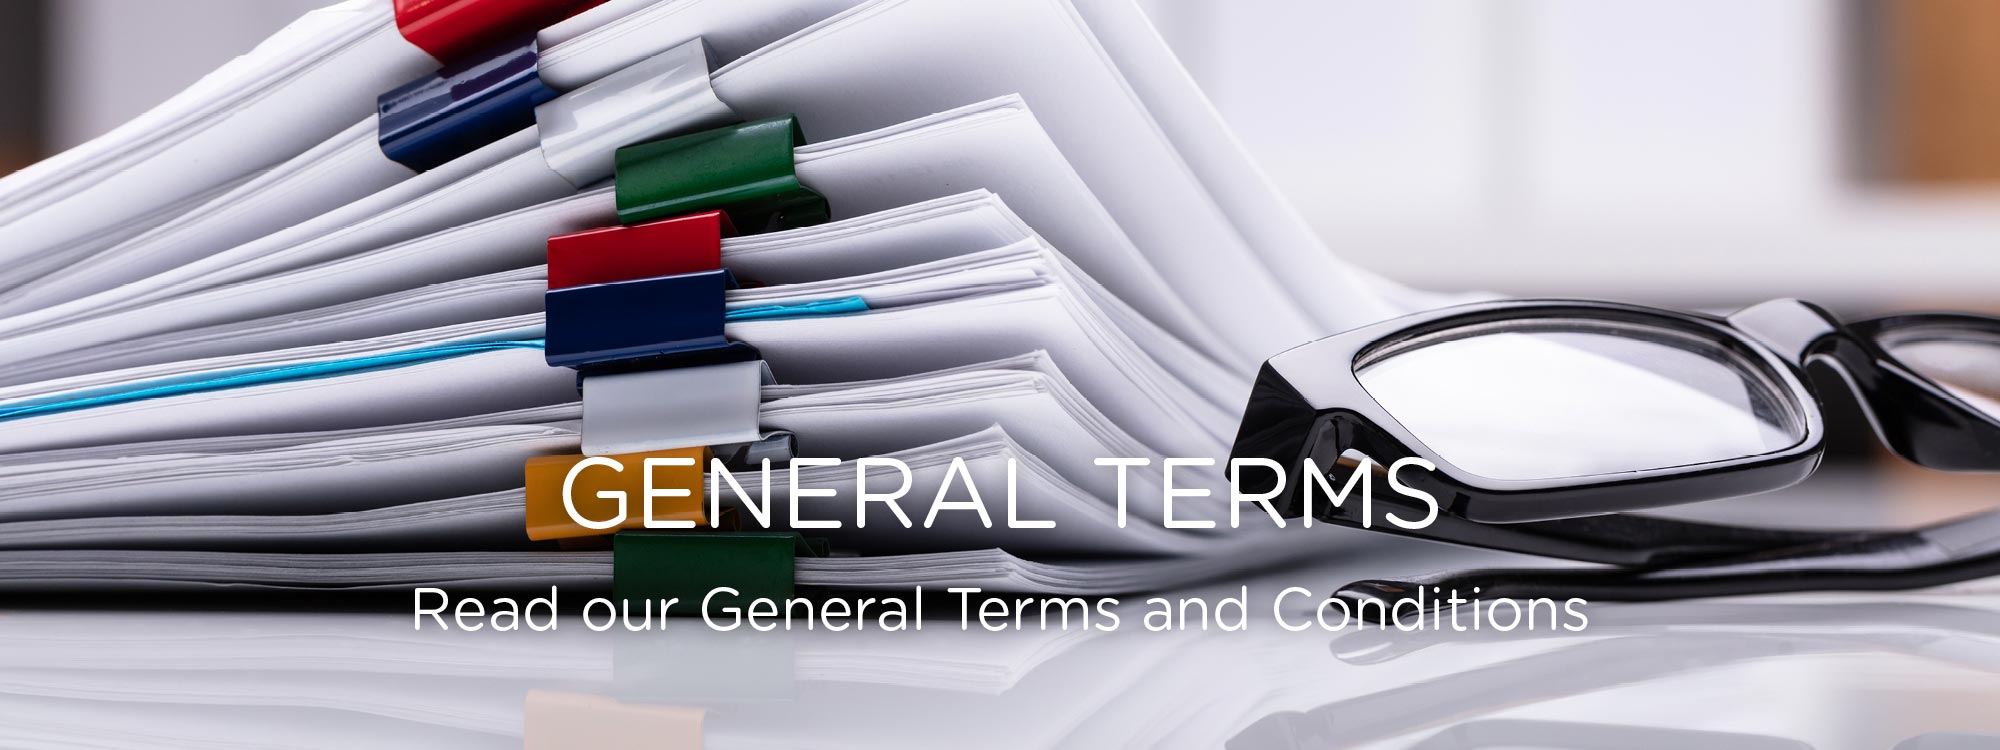 General terms and conditions